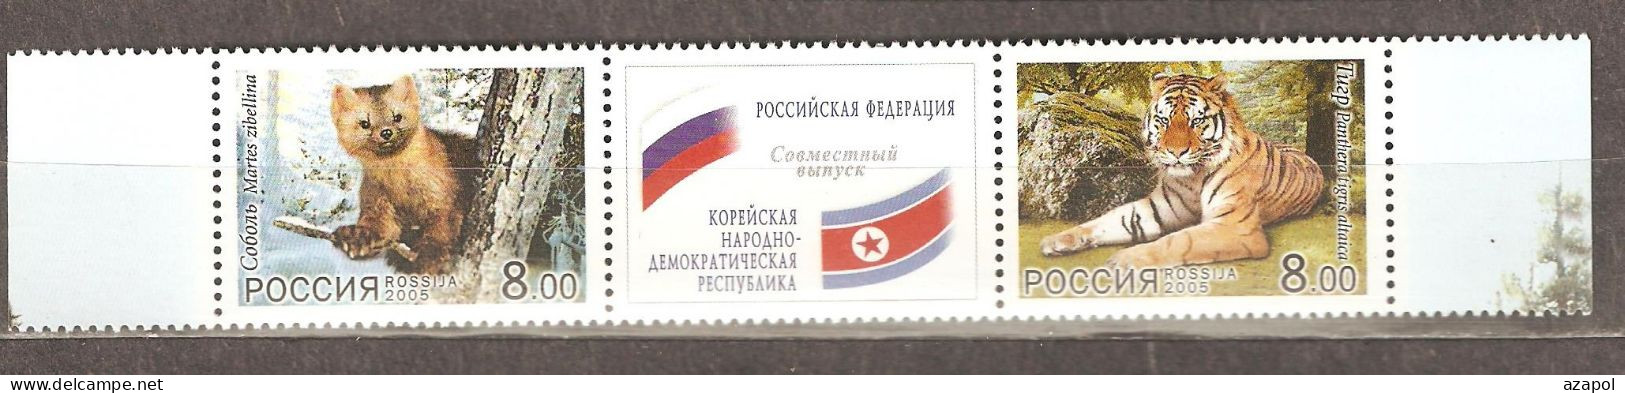 Russia: Full Set Of 2 Mint Stamps In Strip With Label, Fauna. Russia - DPRK Joint Issue, 2005, Mi#1264-5, MNH - Emissions Communes